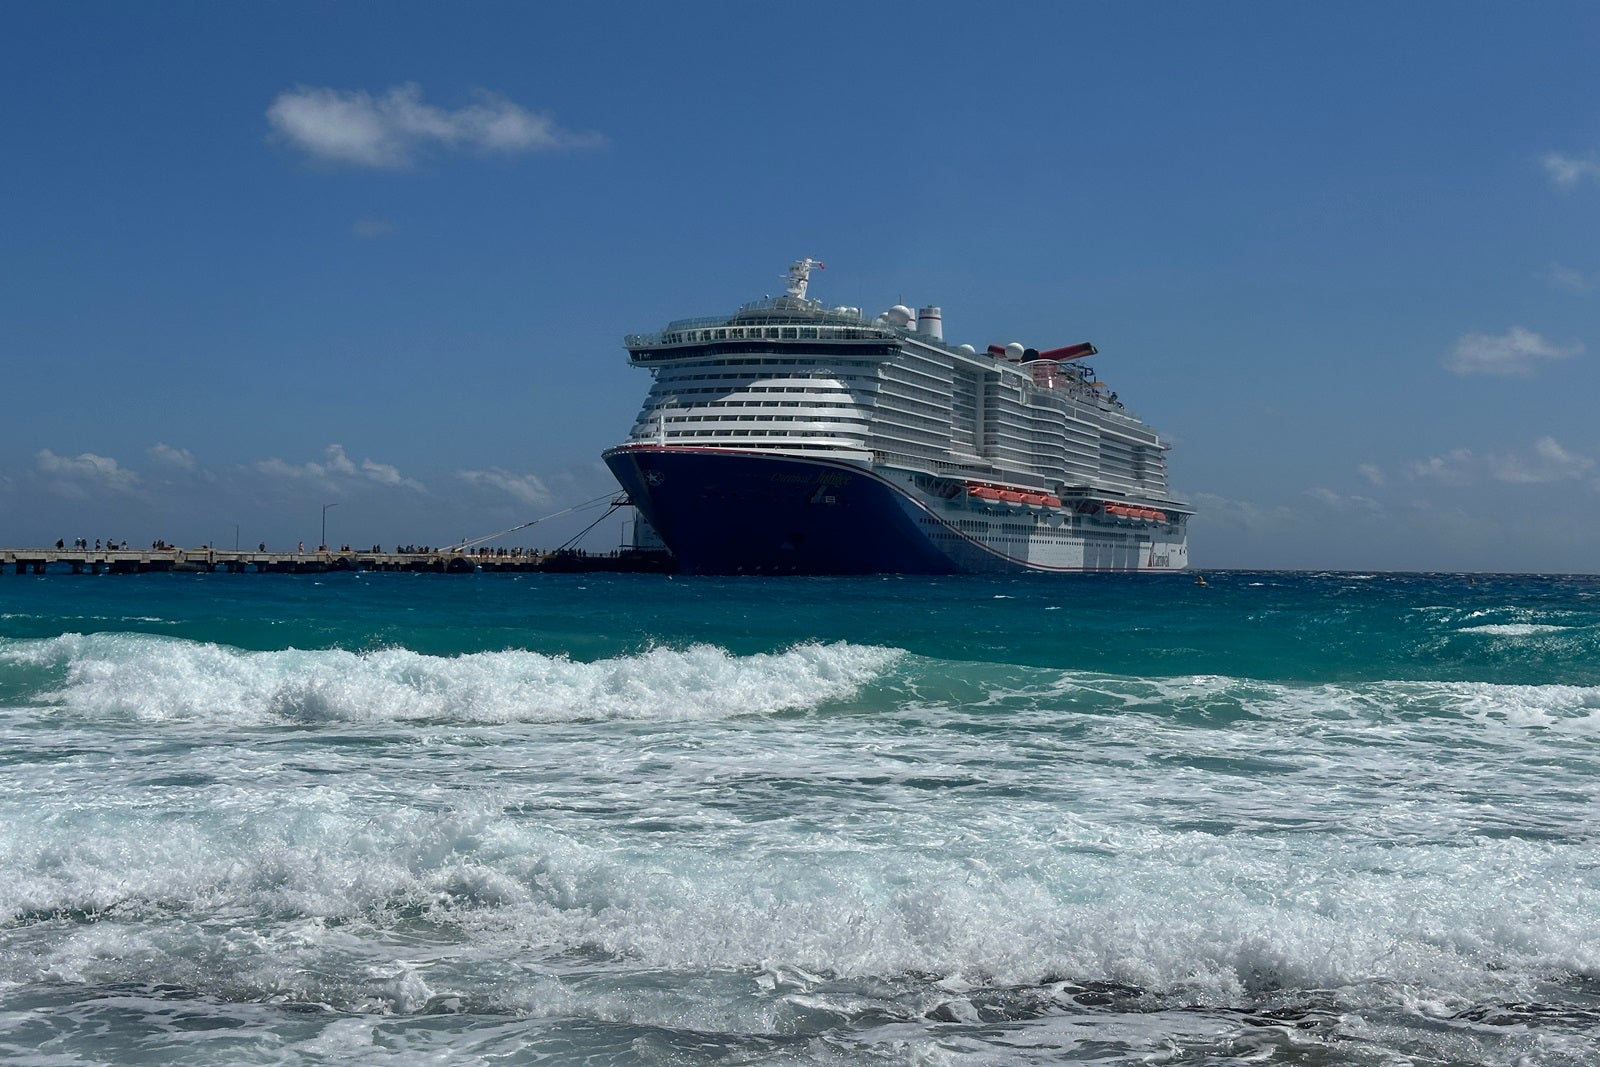 A cruise ship docked in Costa Maya with teal waves crashing in front of it